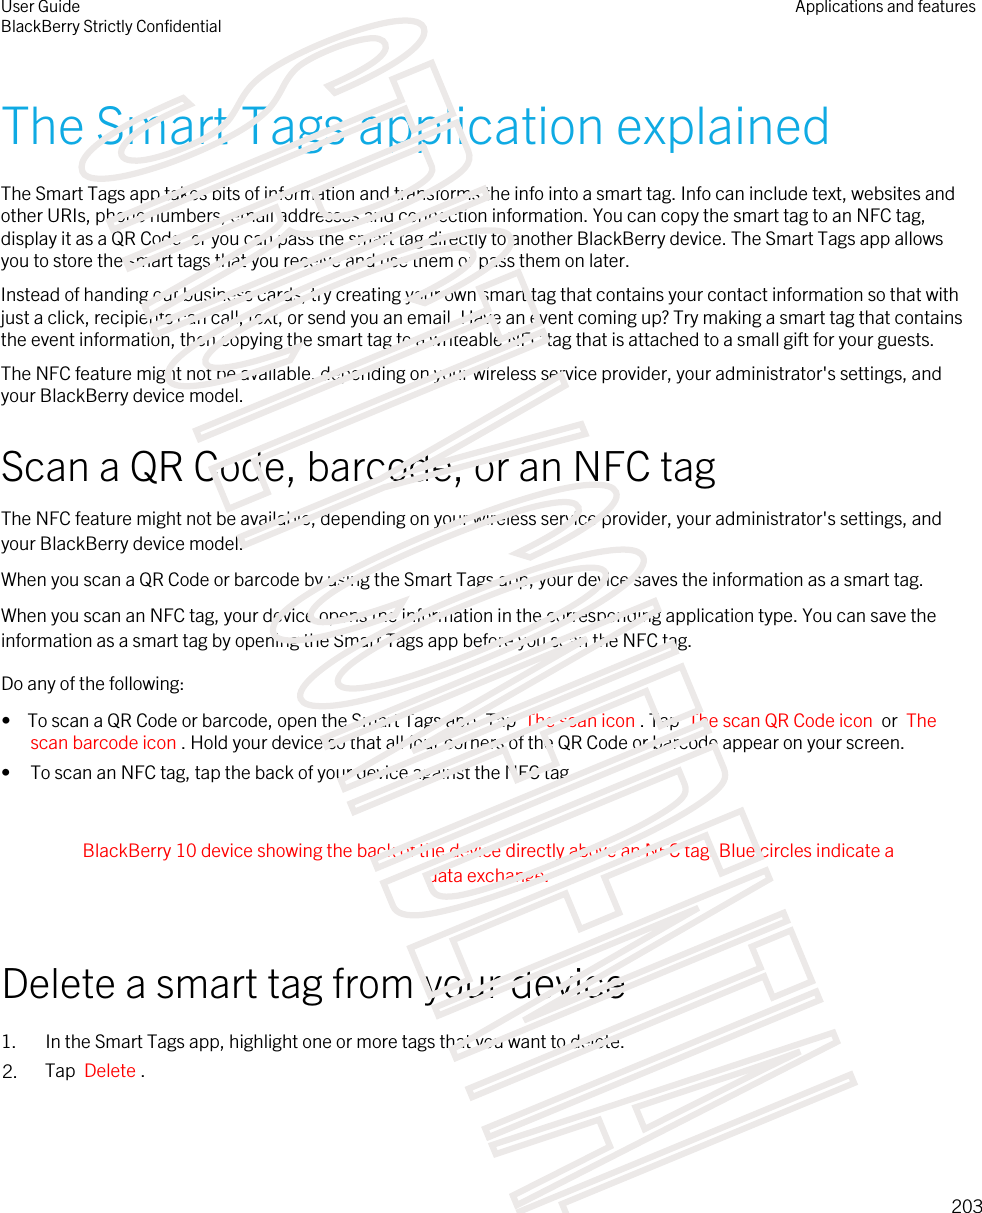 The Smart Tags application explainedThe Smart Tags app takes bits of information and transforms the info into a smart tag. Info can include text, websites and other URIs, phone numbers, email addresses and connection information. You can copy the smart tag to an NFC tag, display it as a QR Code, or you can pass the smart tag directly to another BlackBerry device. The Smart Tags app allows you to store the smart tags that you receive and use them or pass them on later.Instead of handing out business cards, try creating your own smart tag that contains your contact information so that with just a click, recipients can call, text, or send you an email. Have an event coming up? Try making a smart tag that contains the event information, then copying the smart tag to a writeable NFC tag that is attached to a small gift for your guests.The NFC feature might not be available, depending on your wireless service provider, your administrator&apos;s settings, and your BlackBerry device model.Scan a QR Code, barcode, or an NFC tagThe NFC feature might not be available, depending on your wireless service provider, your administrator&apos;s settings, and your BlackBerry device model.When you scan a QR Code or barcode by using the Smart Tags app, your device saves the information as a smart tag.When you scan an NFC tag, your device opens the information in the corresponding application type. You can save the information as a smart tag by opening the Smart Tags app before you scan the NFC tag.Do any of the following:•  To scan a QR Code or barcode, open the Smart Tags app. Tap  The scan icon . Tap  The scan QR Code icon  or  The scan barcode icon . Hold your device so that all four corners of the QR Code or barcode appear on your screen.• To scan an NFC tag, tap the back of your device against the NFC tag. BlackBerry 10 device showing the back of the device directly above an NFC tag. Blue circles indicate a data exchange. Delete a smart tag from your device1. In the Smart Tags app, highlight one or more tags that you want to delete.2. Tap  Delete .User GuideBlackBerry Strictly ConfidentialApplications and features203STRICTLY CONFIDENTIAL